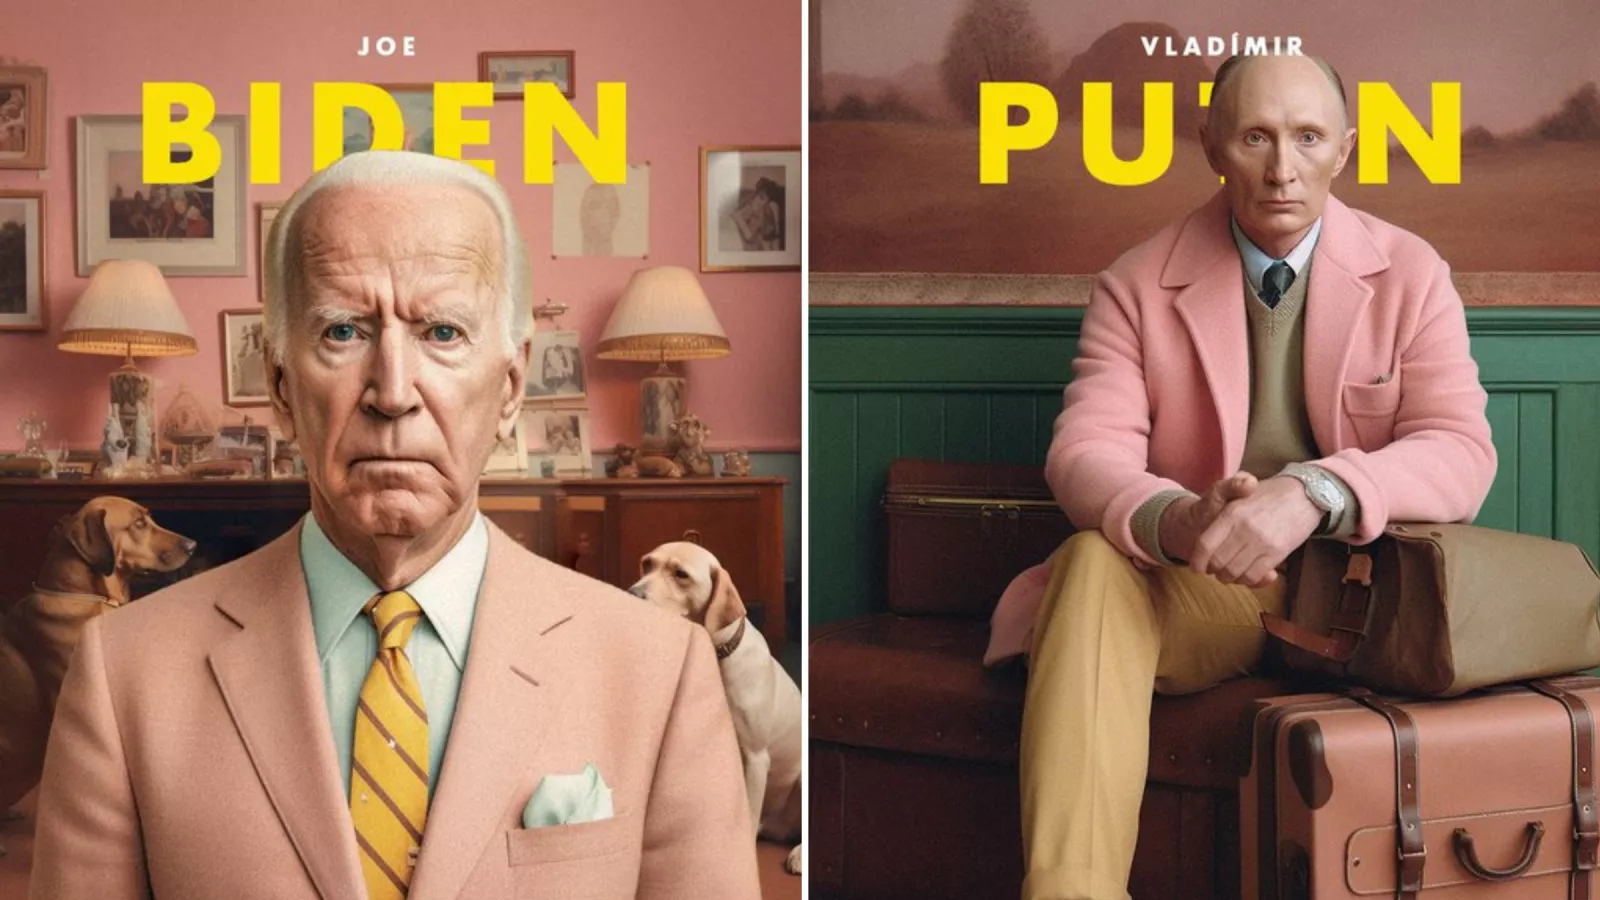 Inspiration Gallery: Wes Anderson Color Palettes